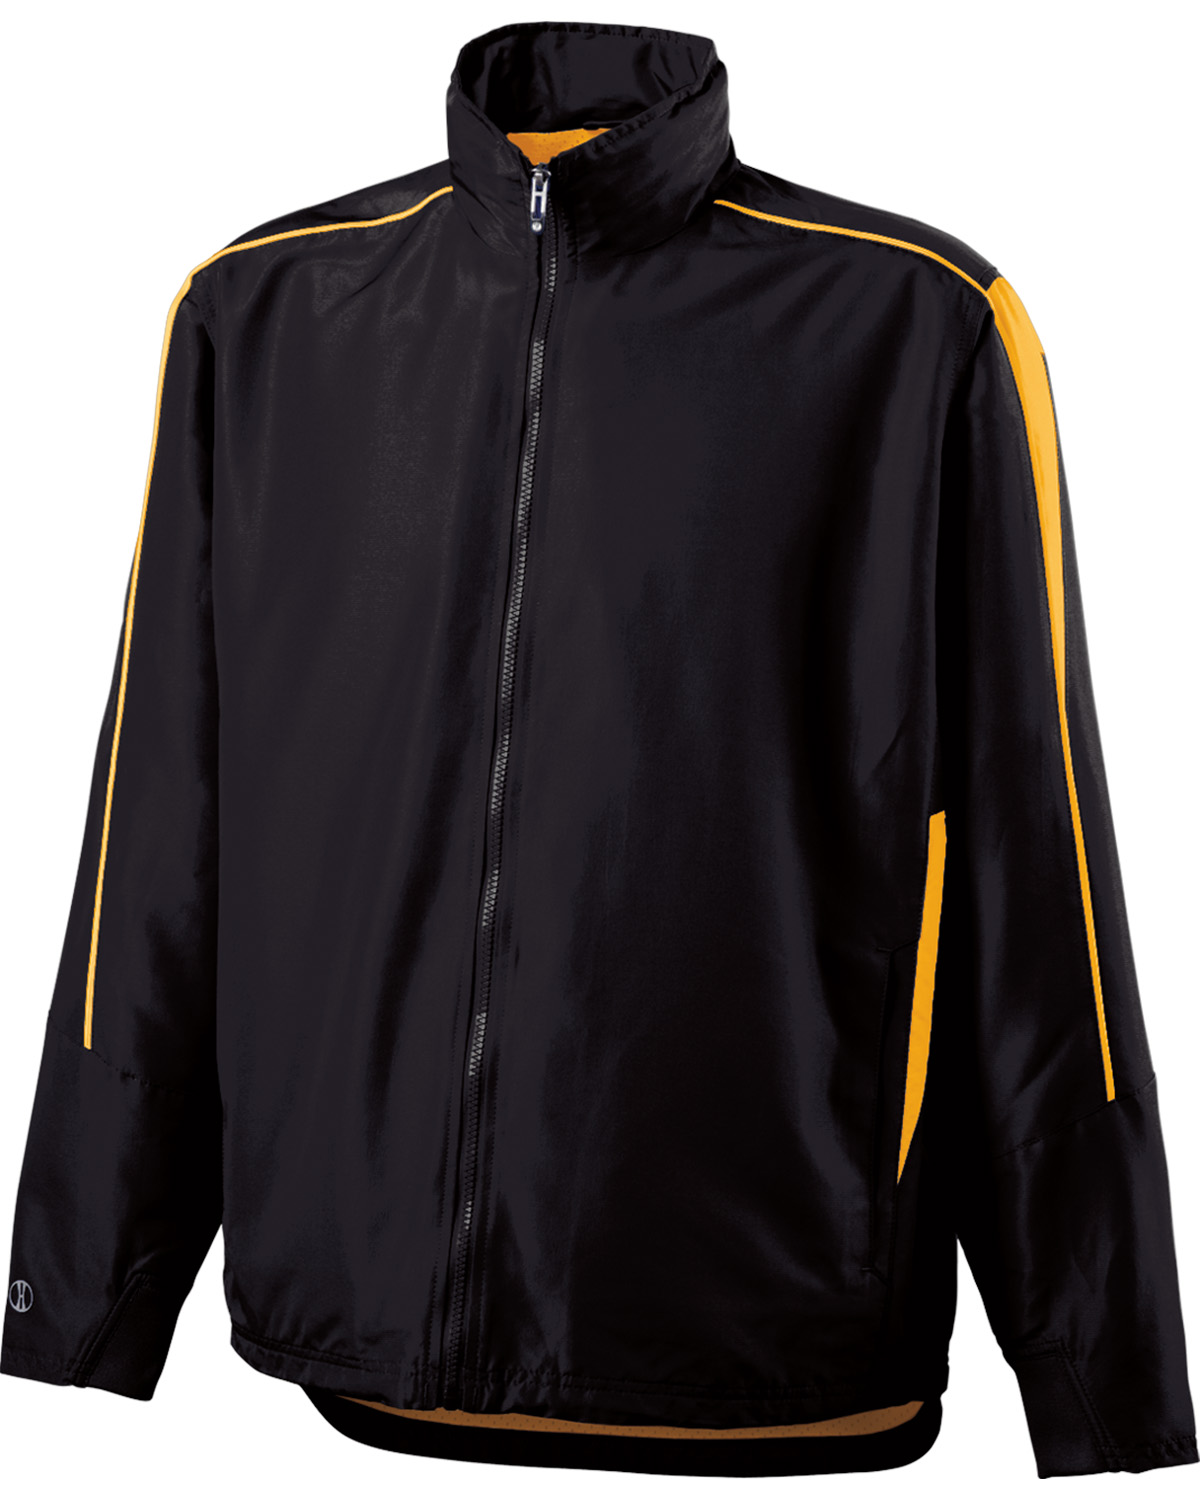 Holloway 229062 - Adult Polyester Full Zip Hooded Aggression Jacket